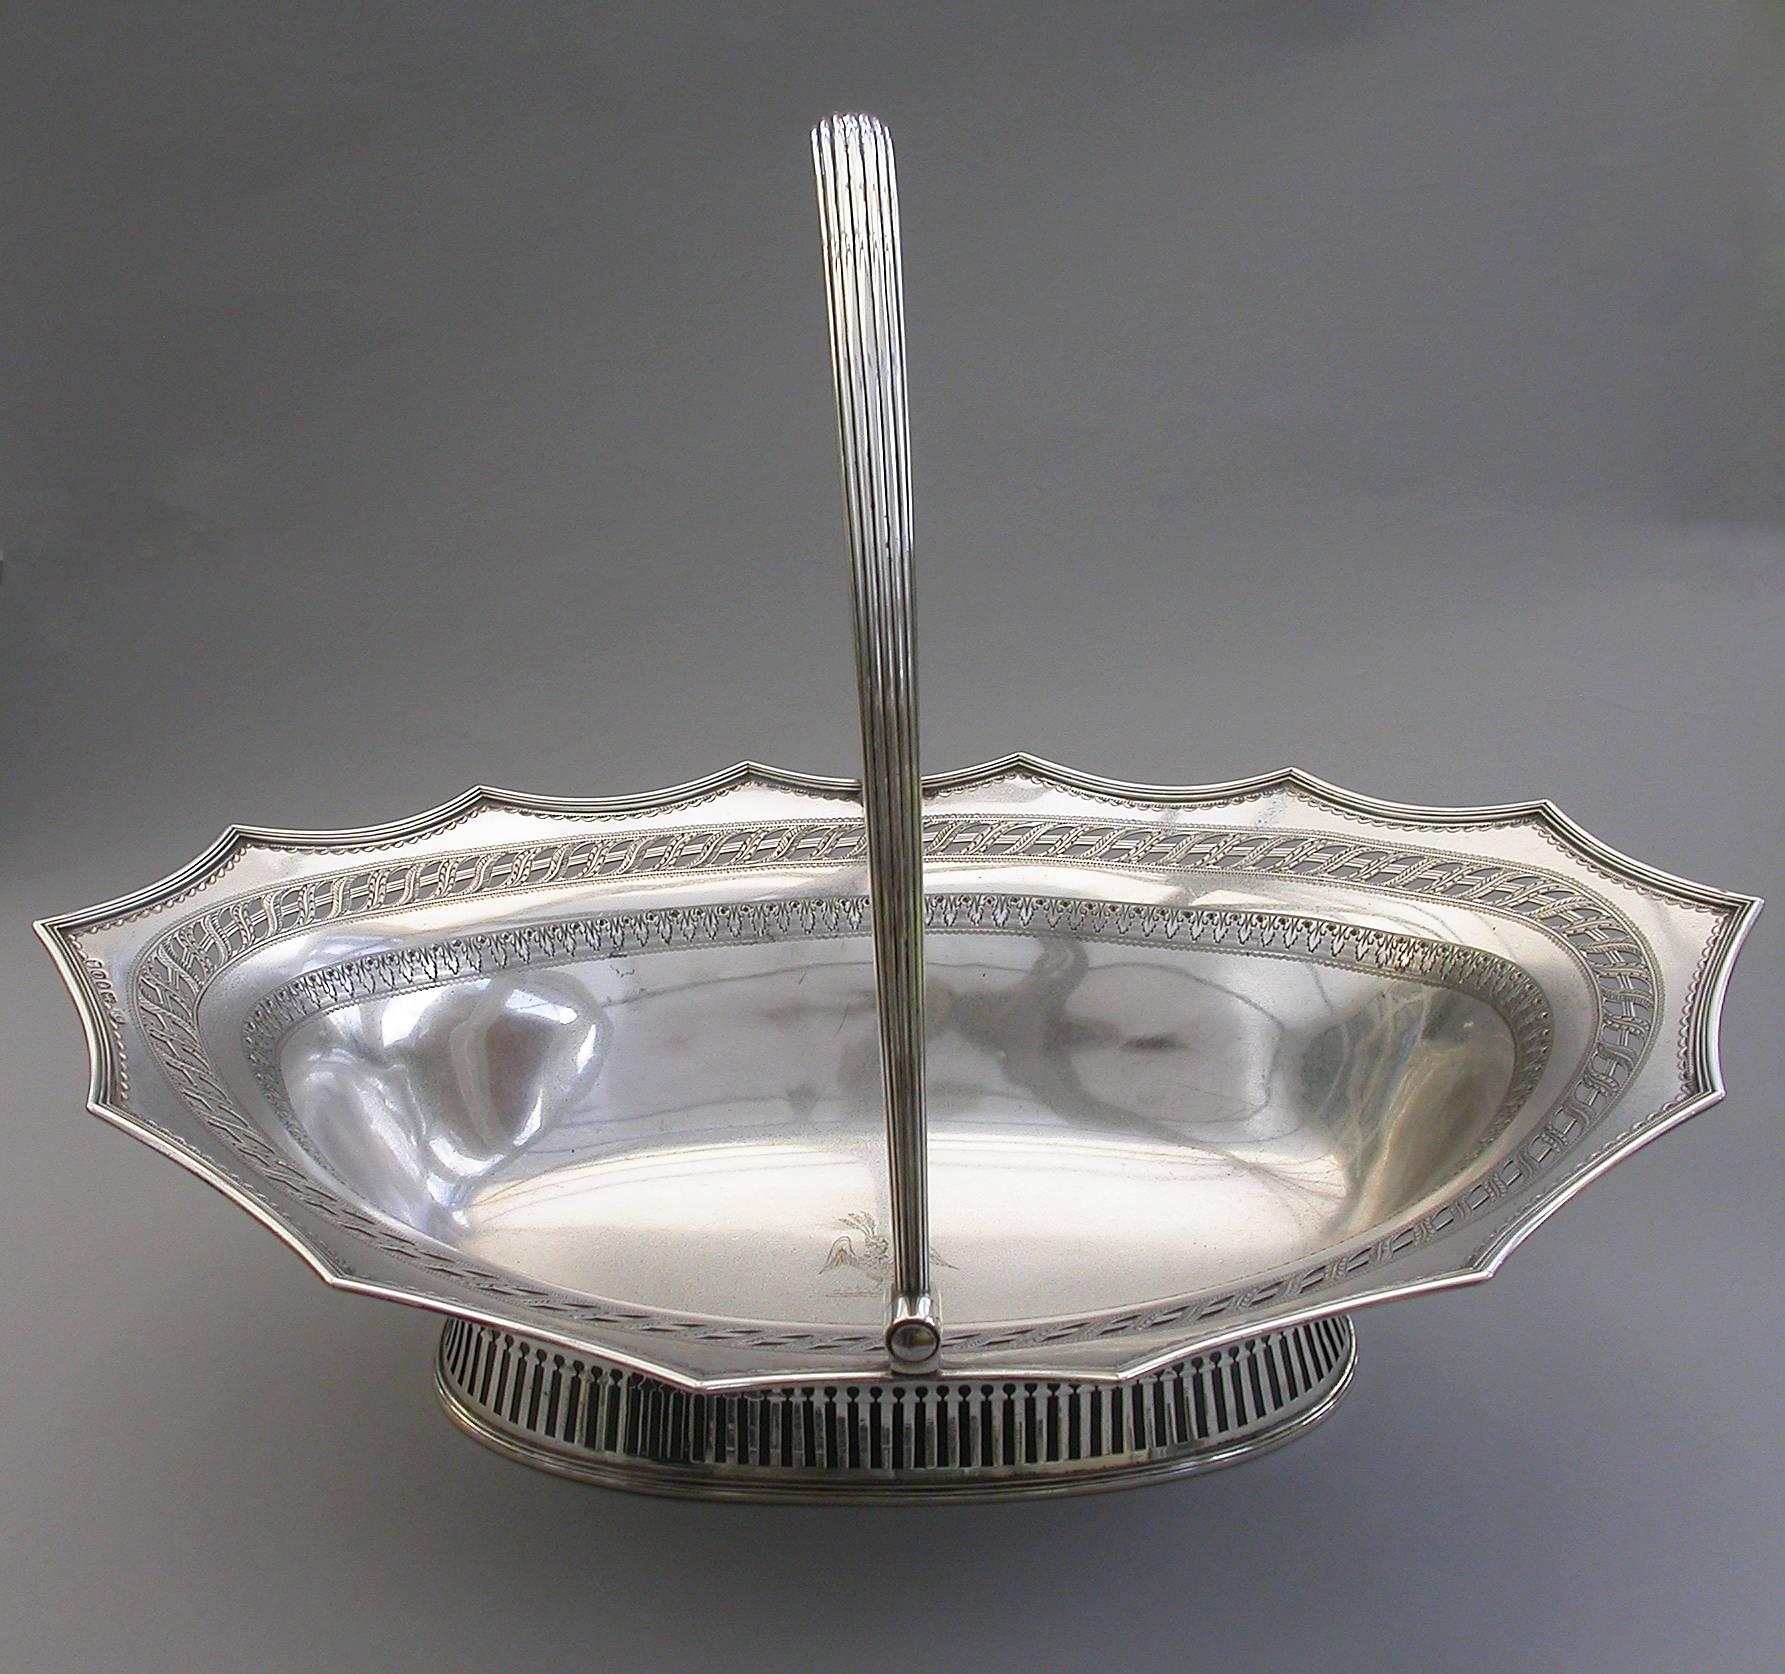 A very fine quality George III silver cake basket of oval form with pierced collet foot and reeded swing handle, the shaped scalloped rim with applied reeded border and decorated with bands of pierced and bright-cut engraved leaves and scrolls, the